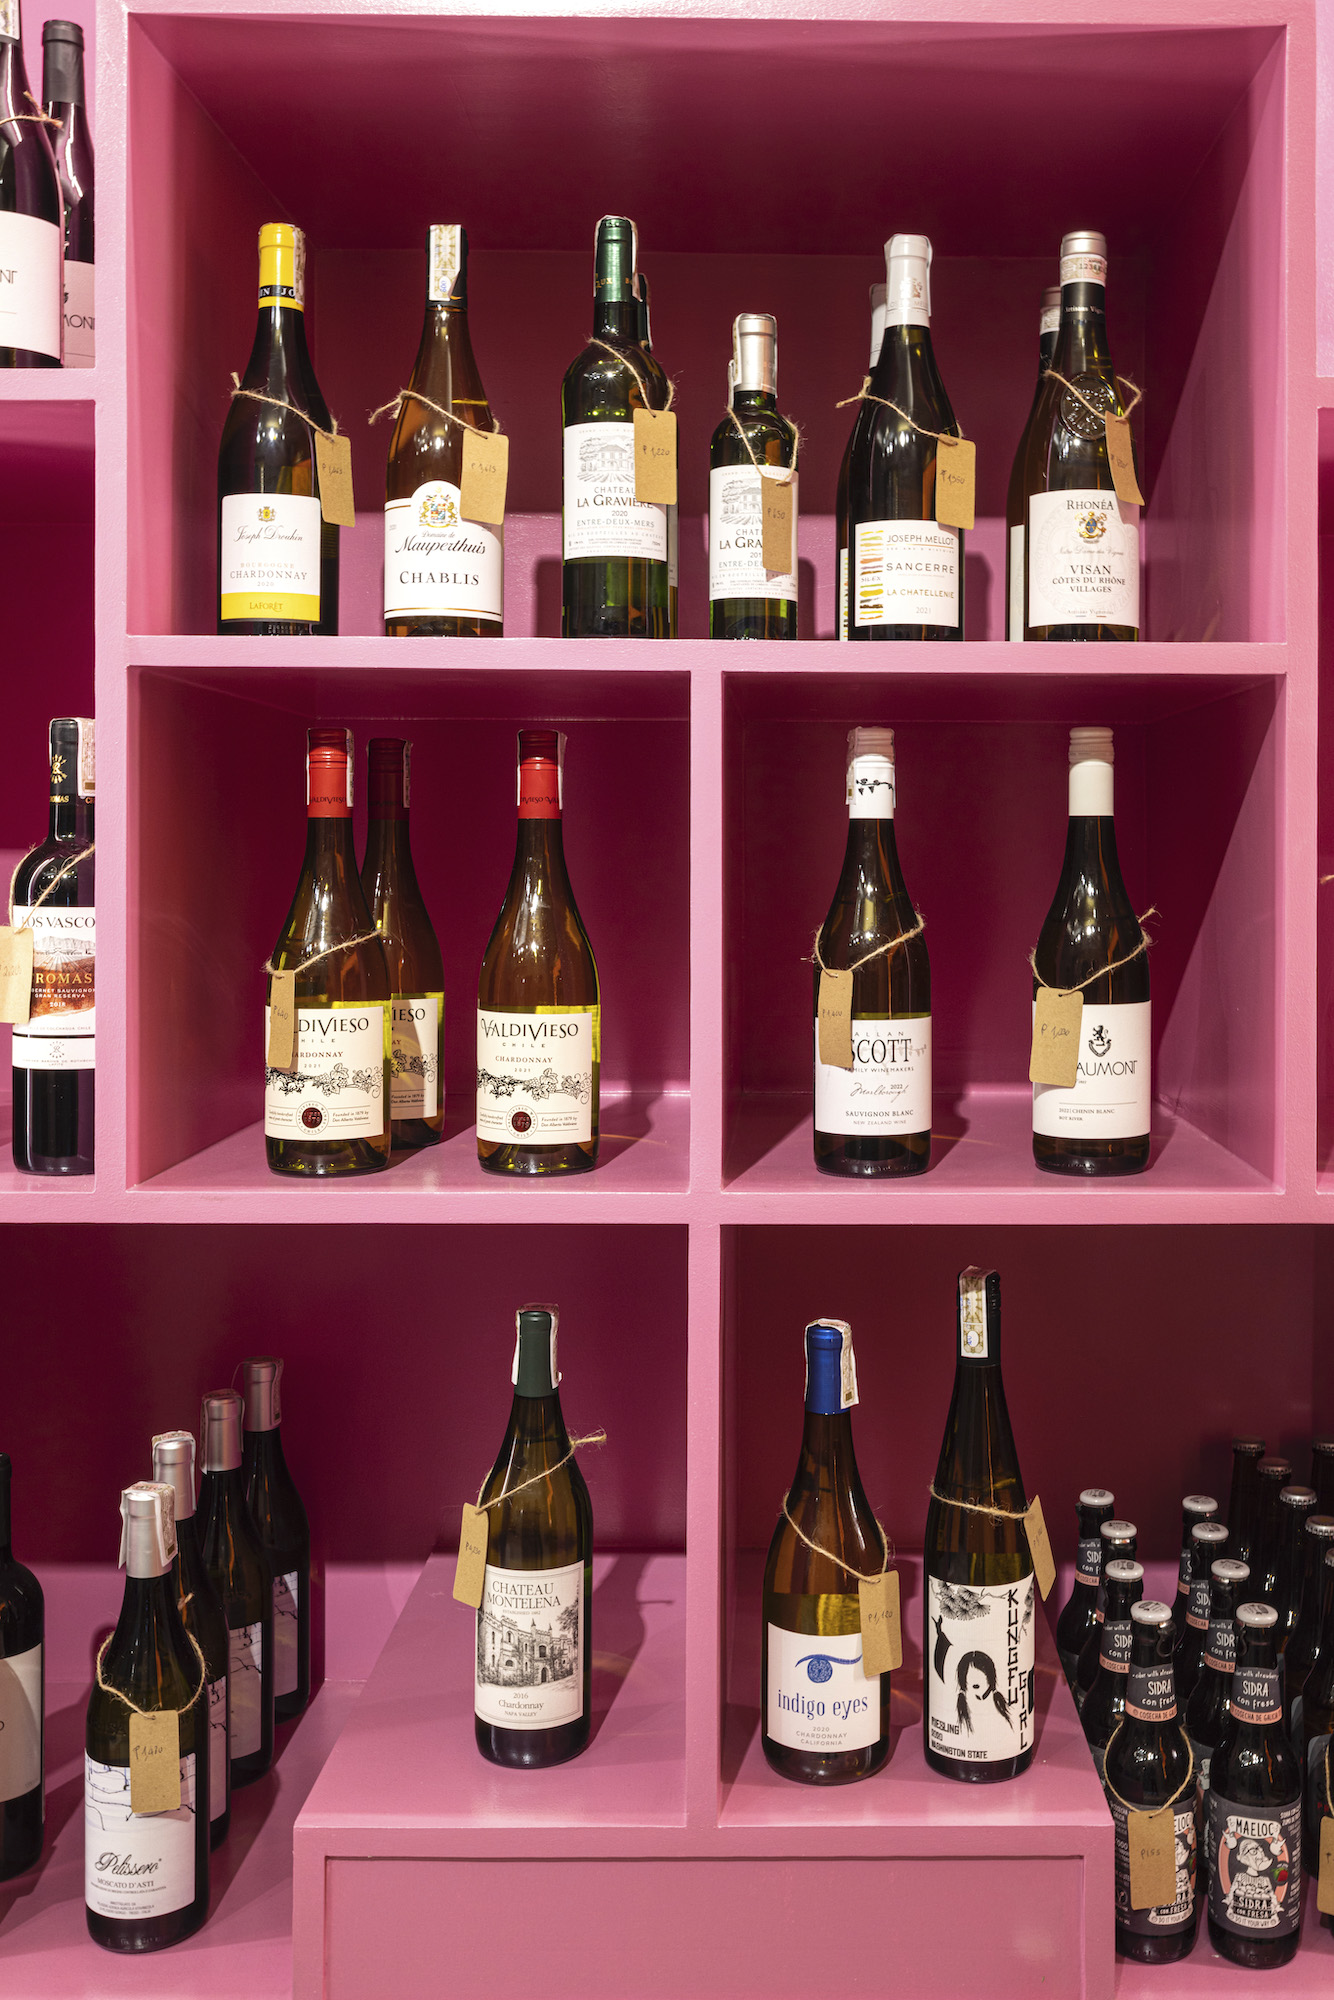 The wine list of H&T Wine Gallery also comprises of bottles from Piedmont, Tuscany, and Veneto from Italy as well as cabernet sauvignons, moscatos, chardonnays, and rieslings from France, New Zealand, Chile, Napa Valley, and Washington State